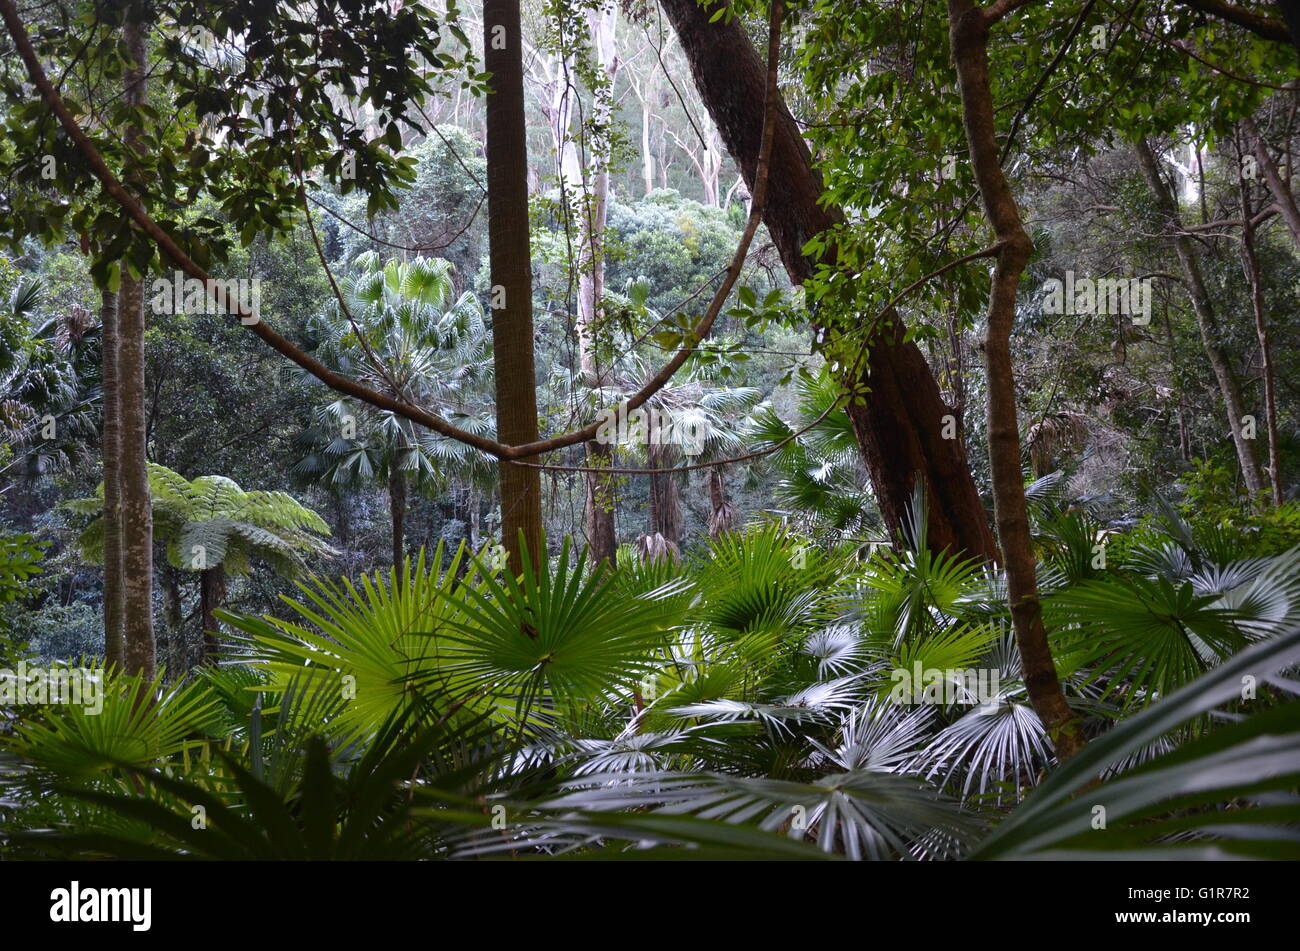 Lush Rainforest scene with trees, vines, palms and ferns Stock Photo